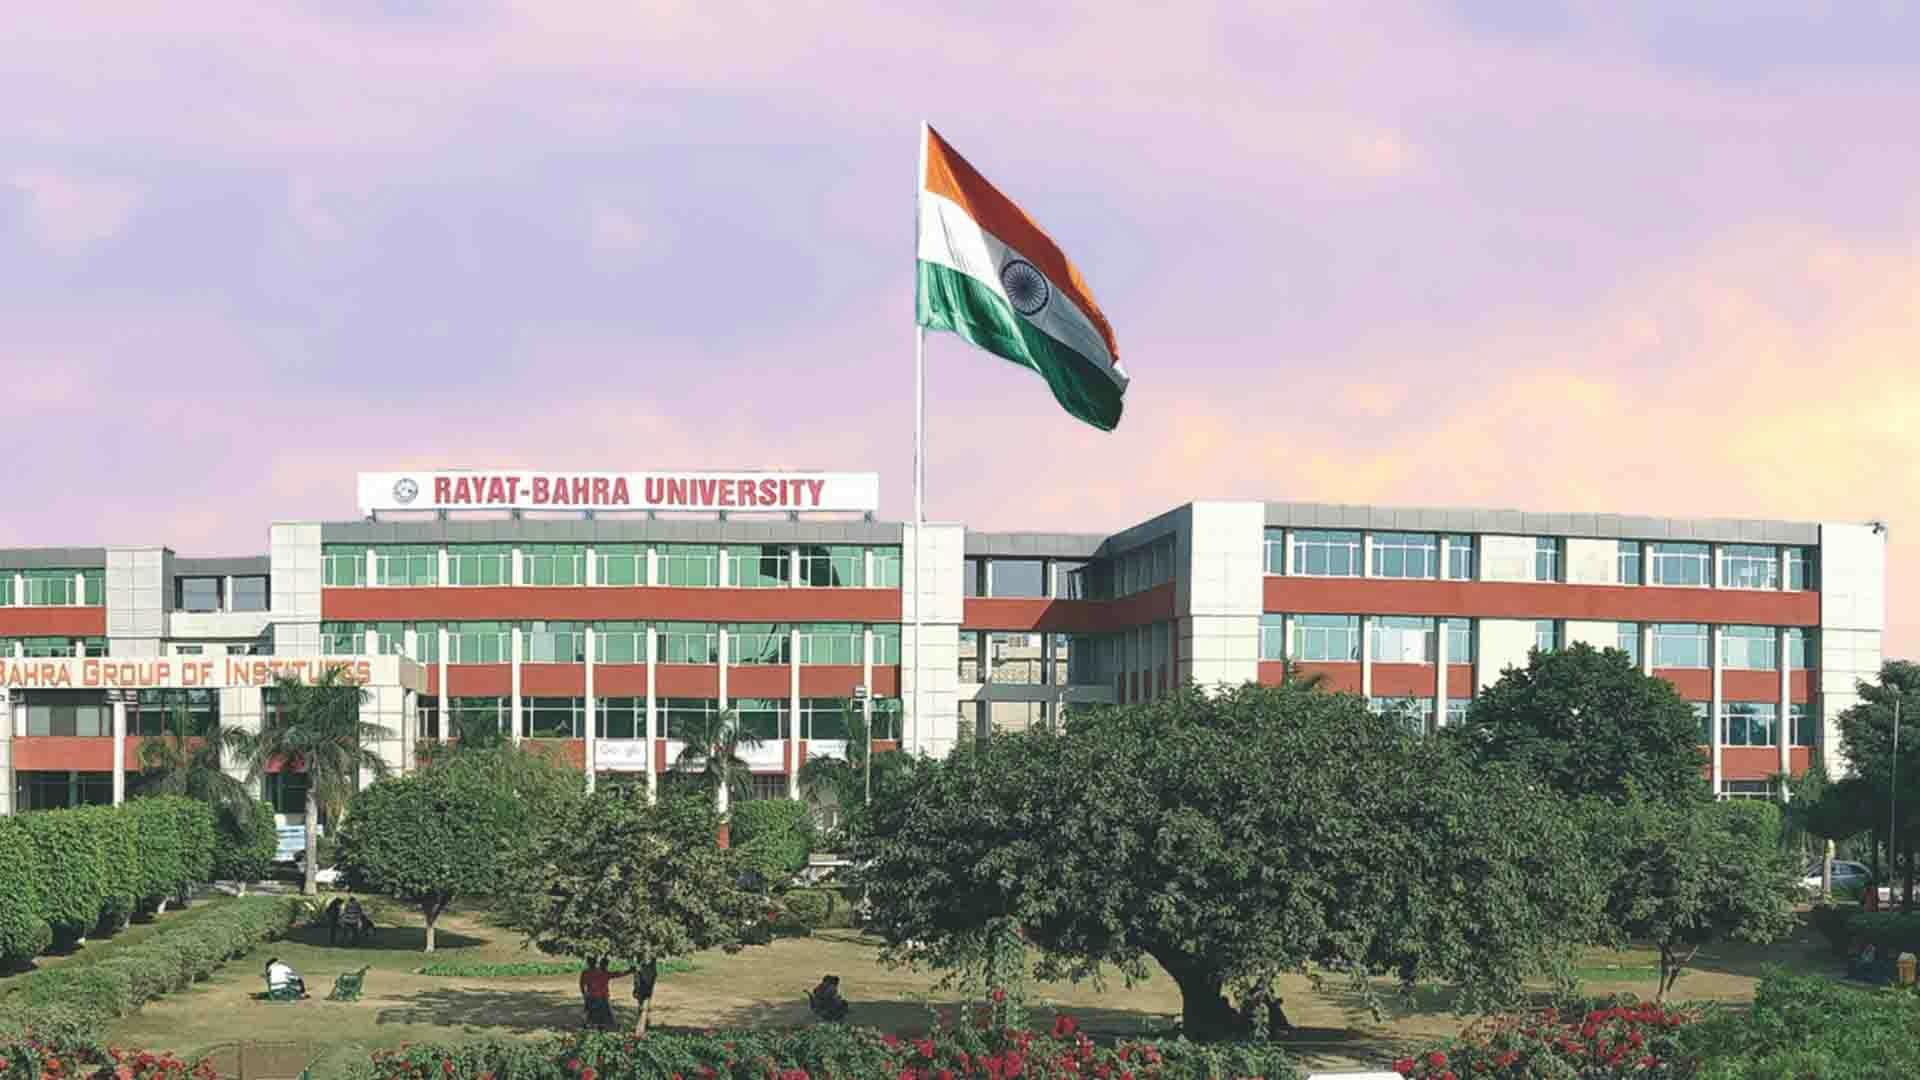 Pursue MBA degree course from Rayat Bahra University, Mohali with Sunstone's edge